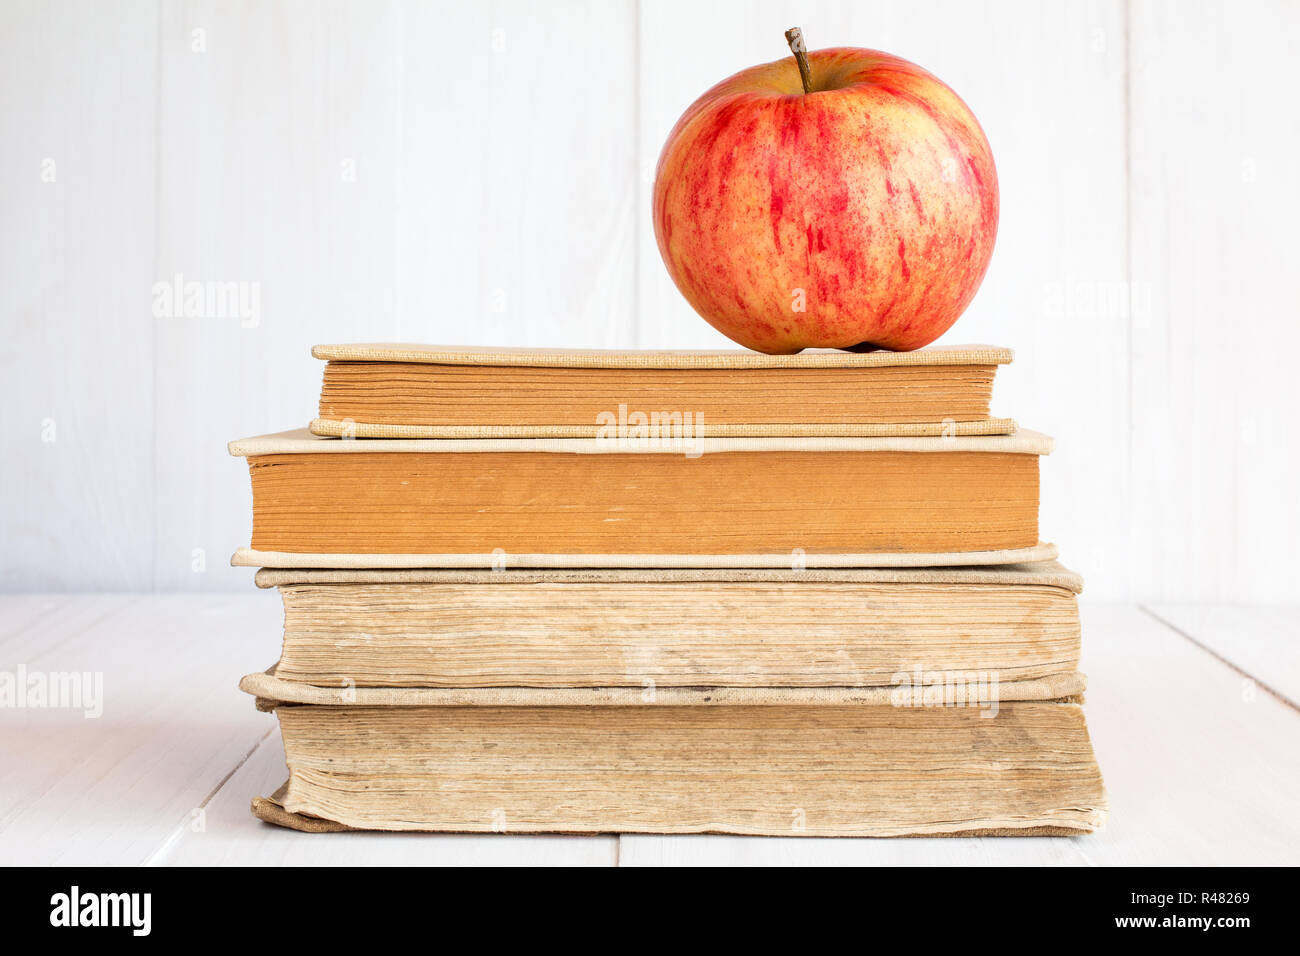 Stack of books with red apple Stock Photo